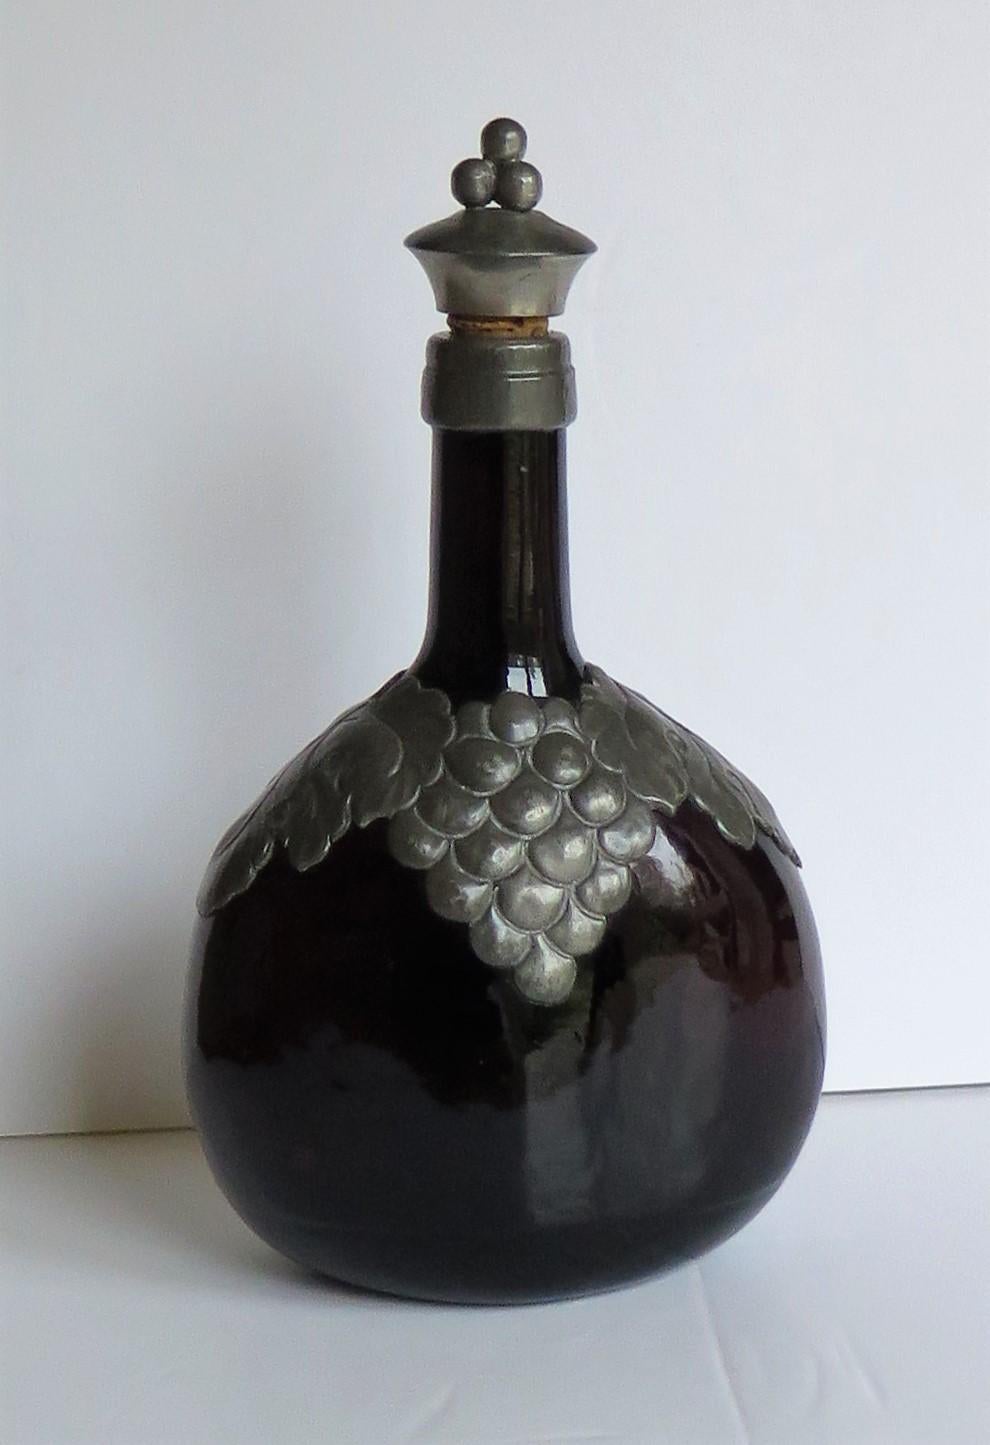 This is a good, dark amber glass bottle or decanter fitted with a pewter grape and leaf collar and a cork and pewter stopper, all in an Art Nouveau style, which we attribute to a Danish maker in the 19th century, circa 1870.

The bottle is flagon